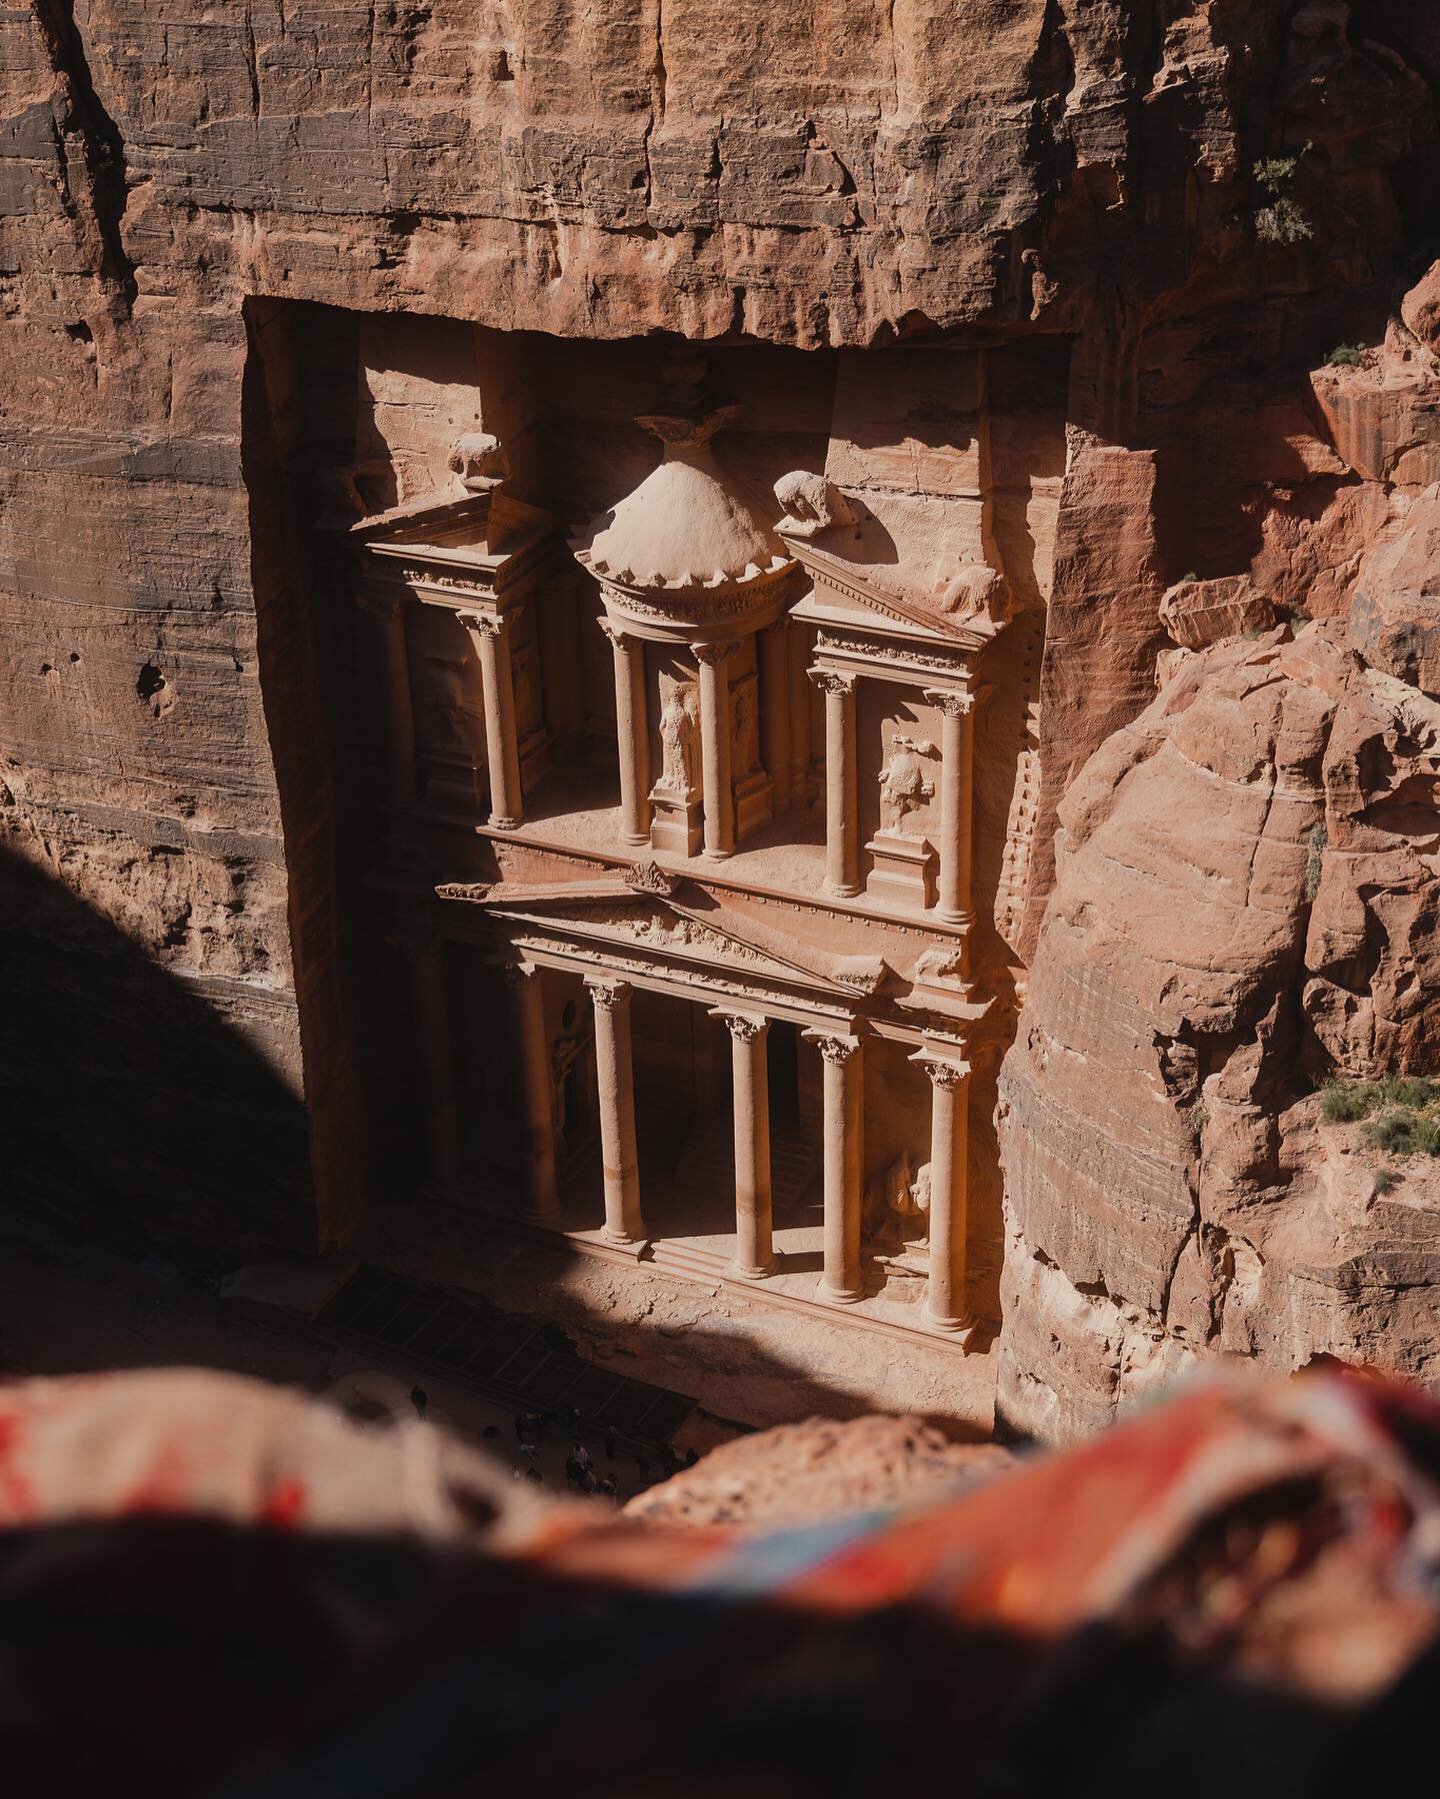 Day one of two at Petra, Jordan. 🇯🇴

It's a place where you definitely will loose the track of time. Step into the world of ancient wonders in Petra, Jordan 🏛️ Carved into rose-colored sandstone cliffs, this UNESCO World Heritage Site boasts stunn